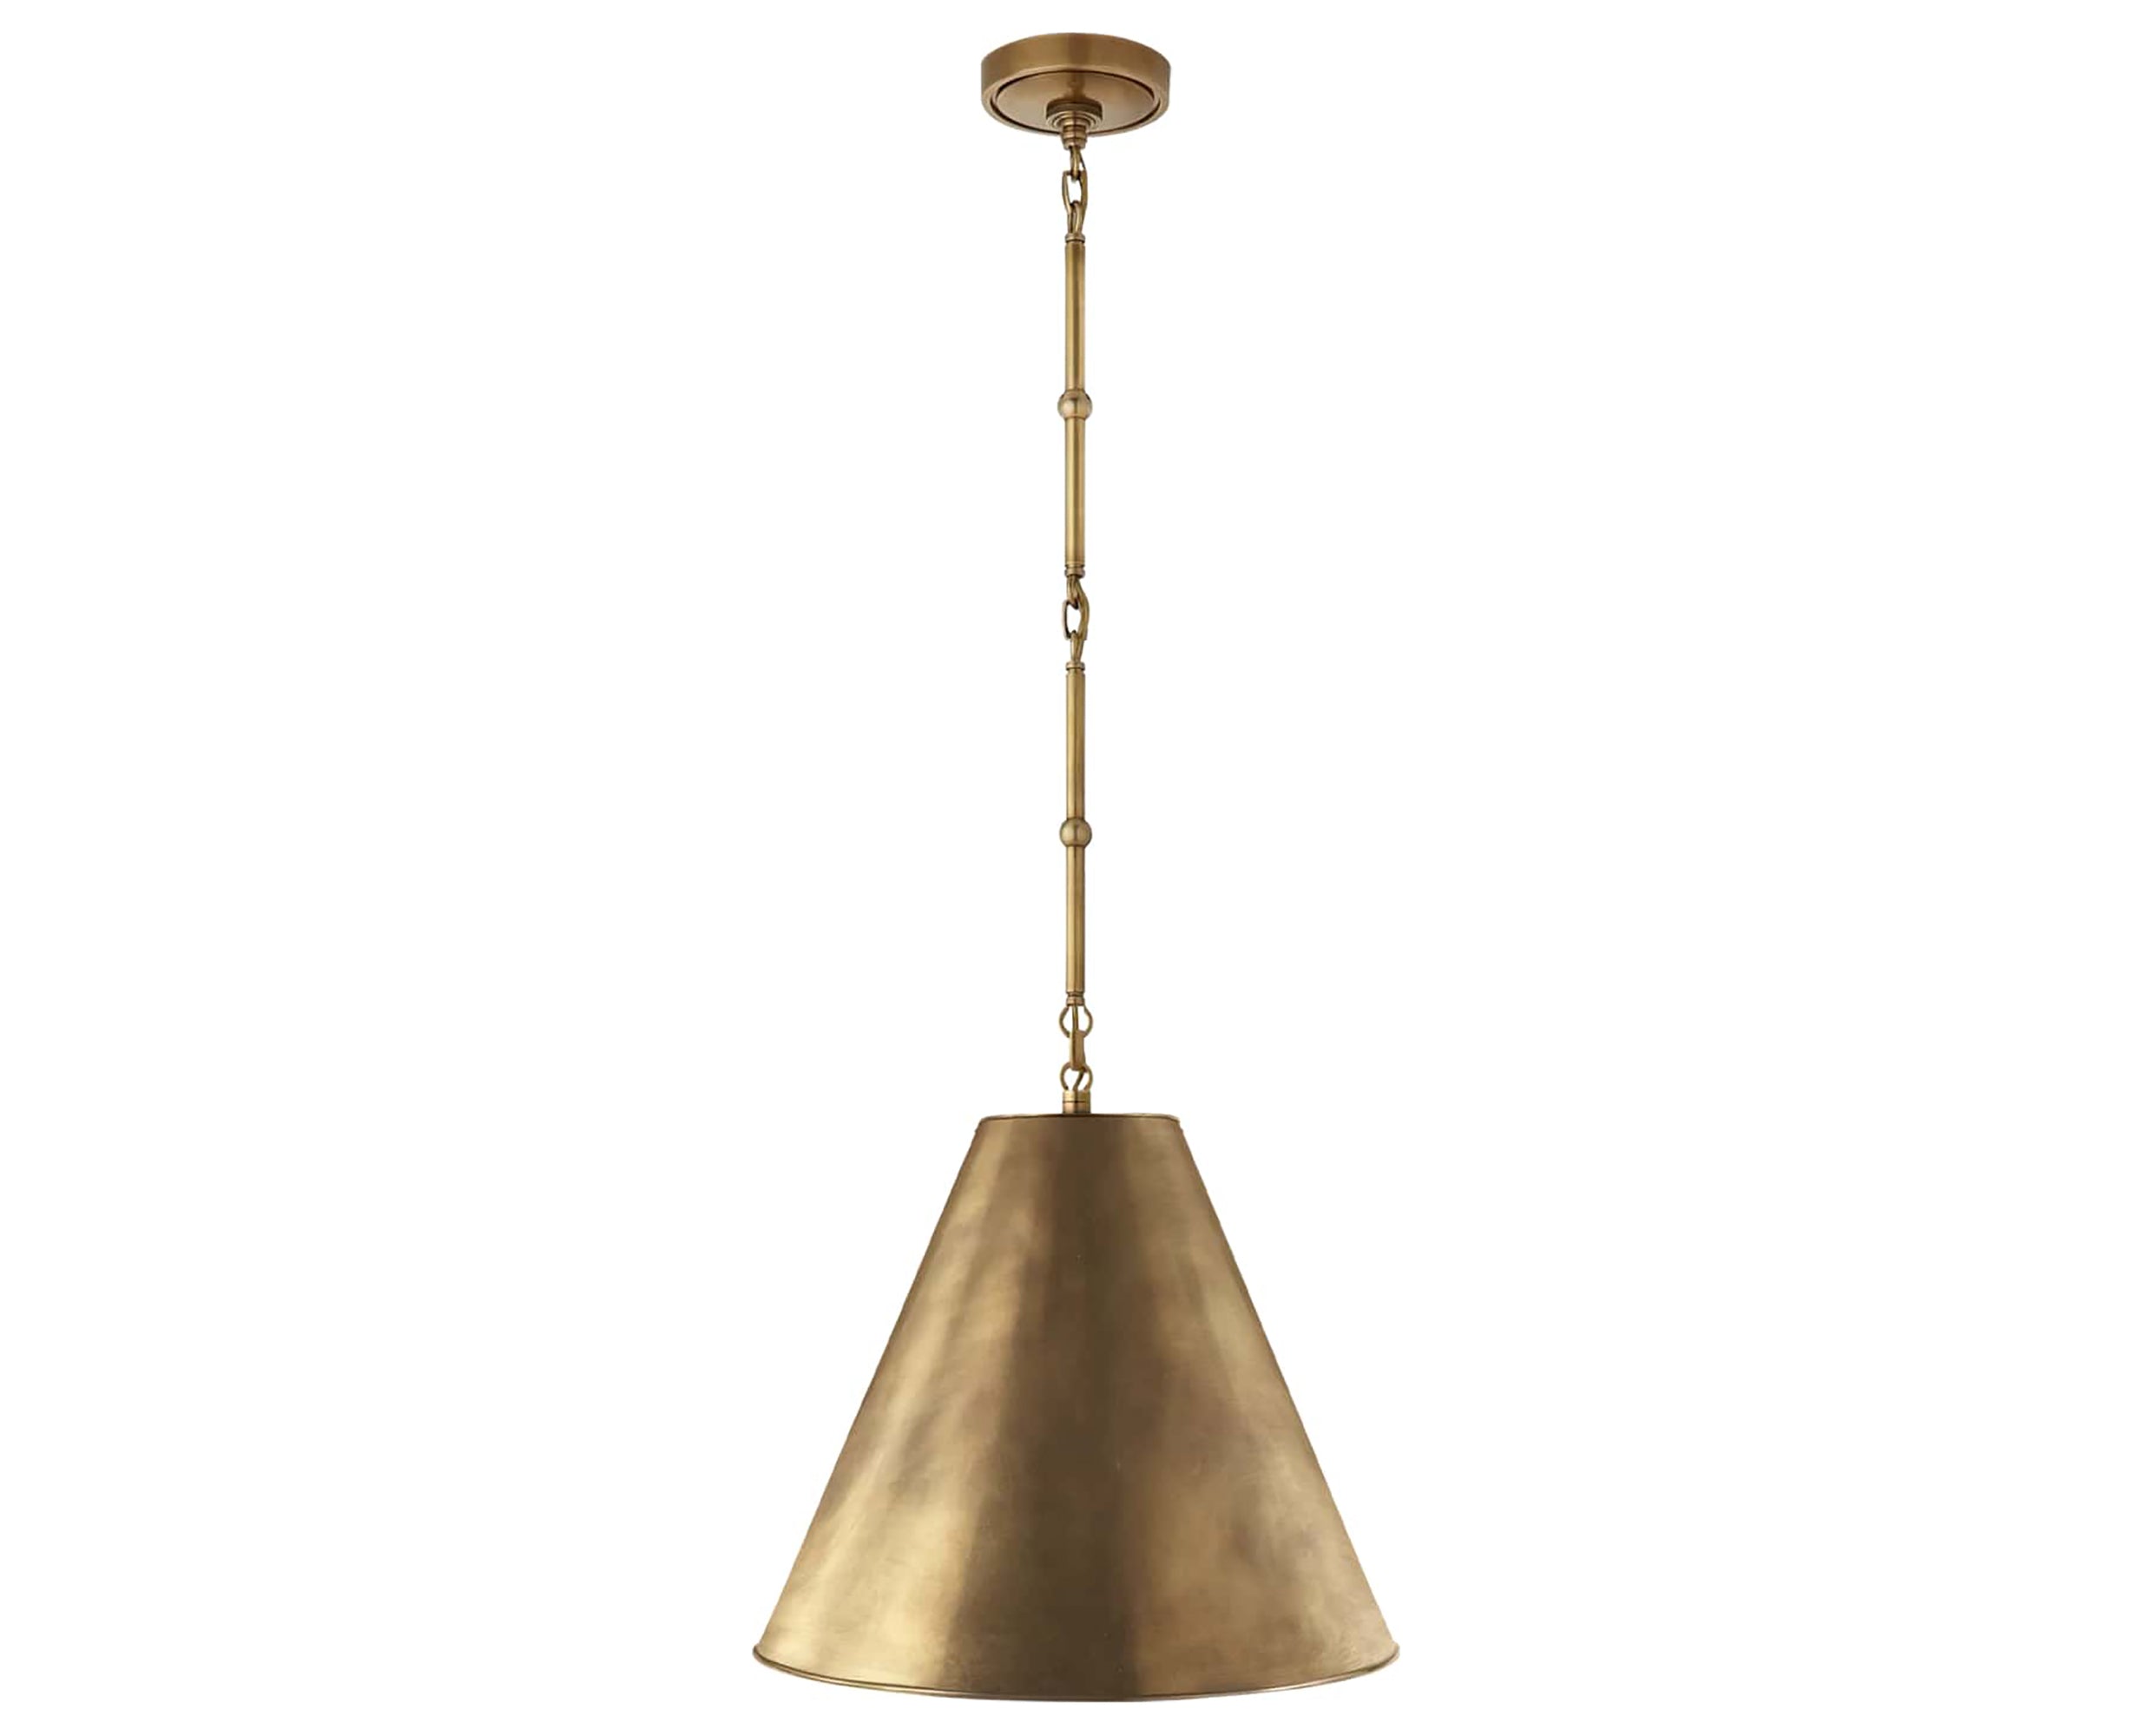 Hand-Rubbed Antique Brass and Hand-Rubbed Antique Brass | Goodman Small Hanging Light | Valley Ridge Furniture